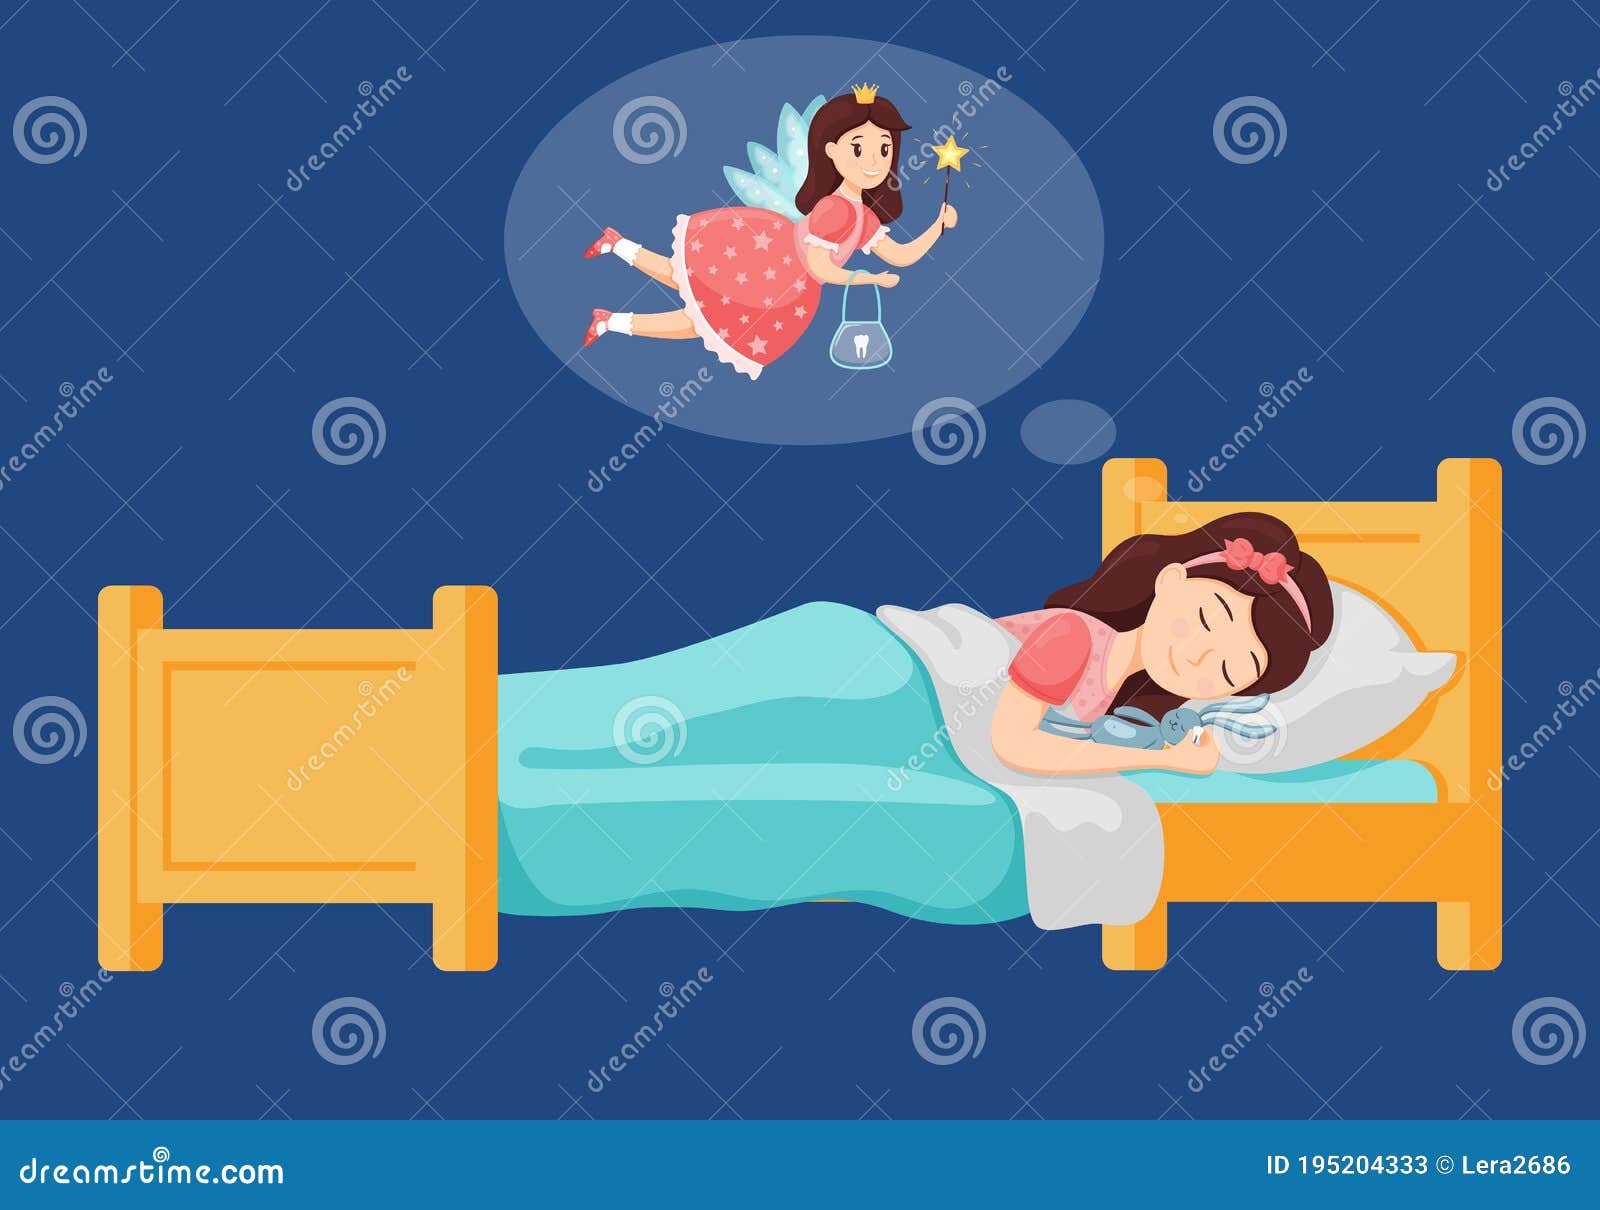 A Cute Little Girl Sleeps in Bed and Holds a Fallen Tooth in Her Hand ...